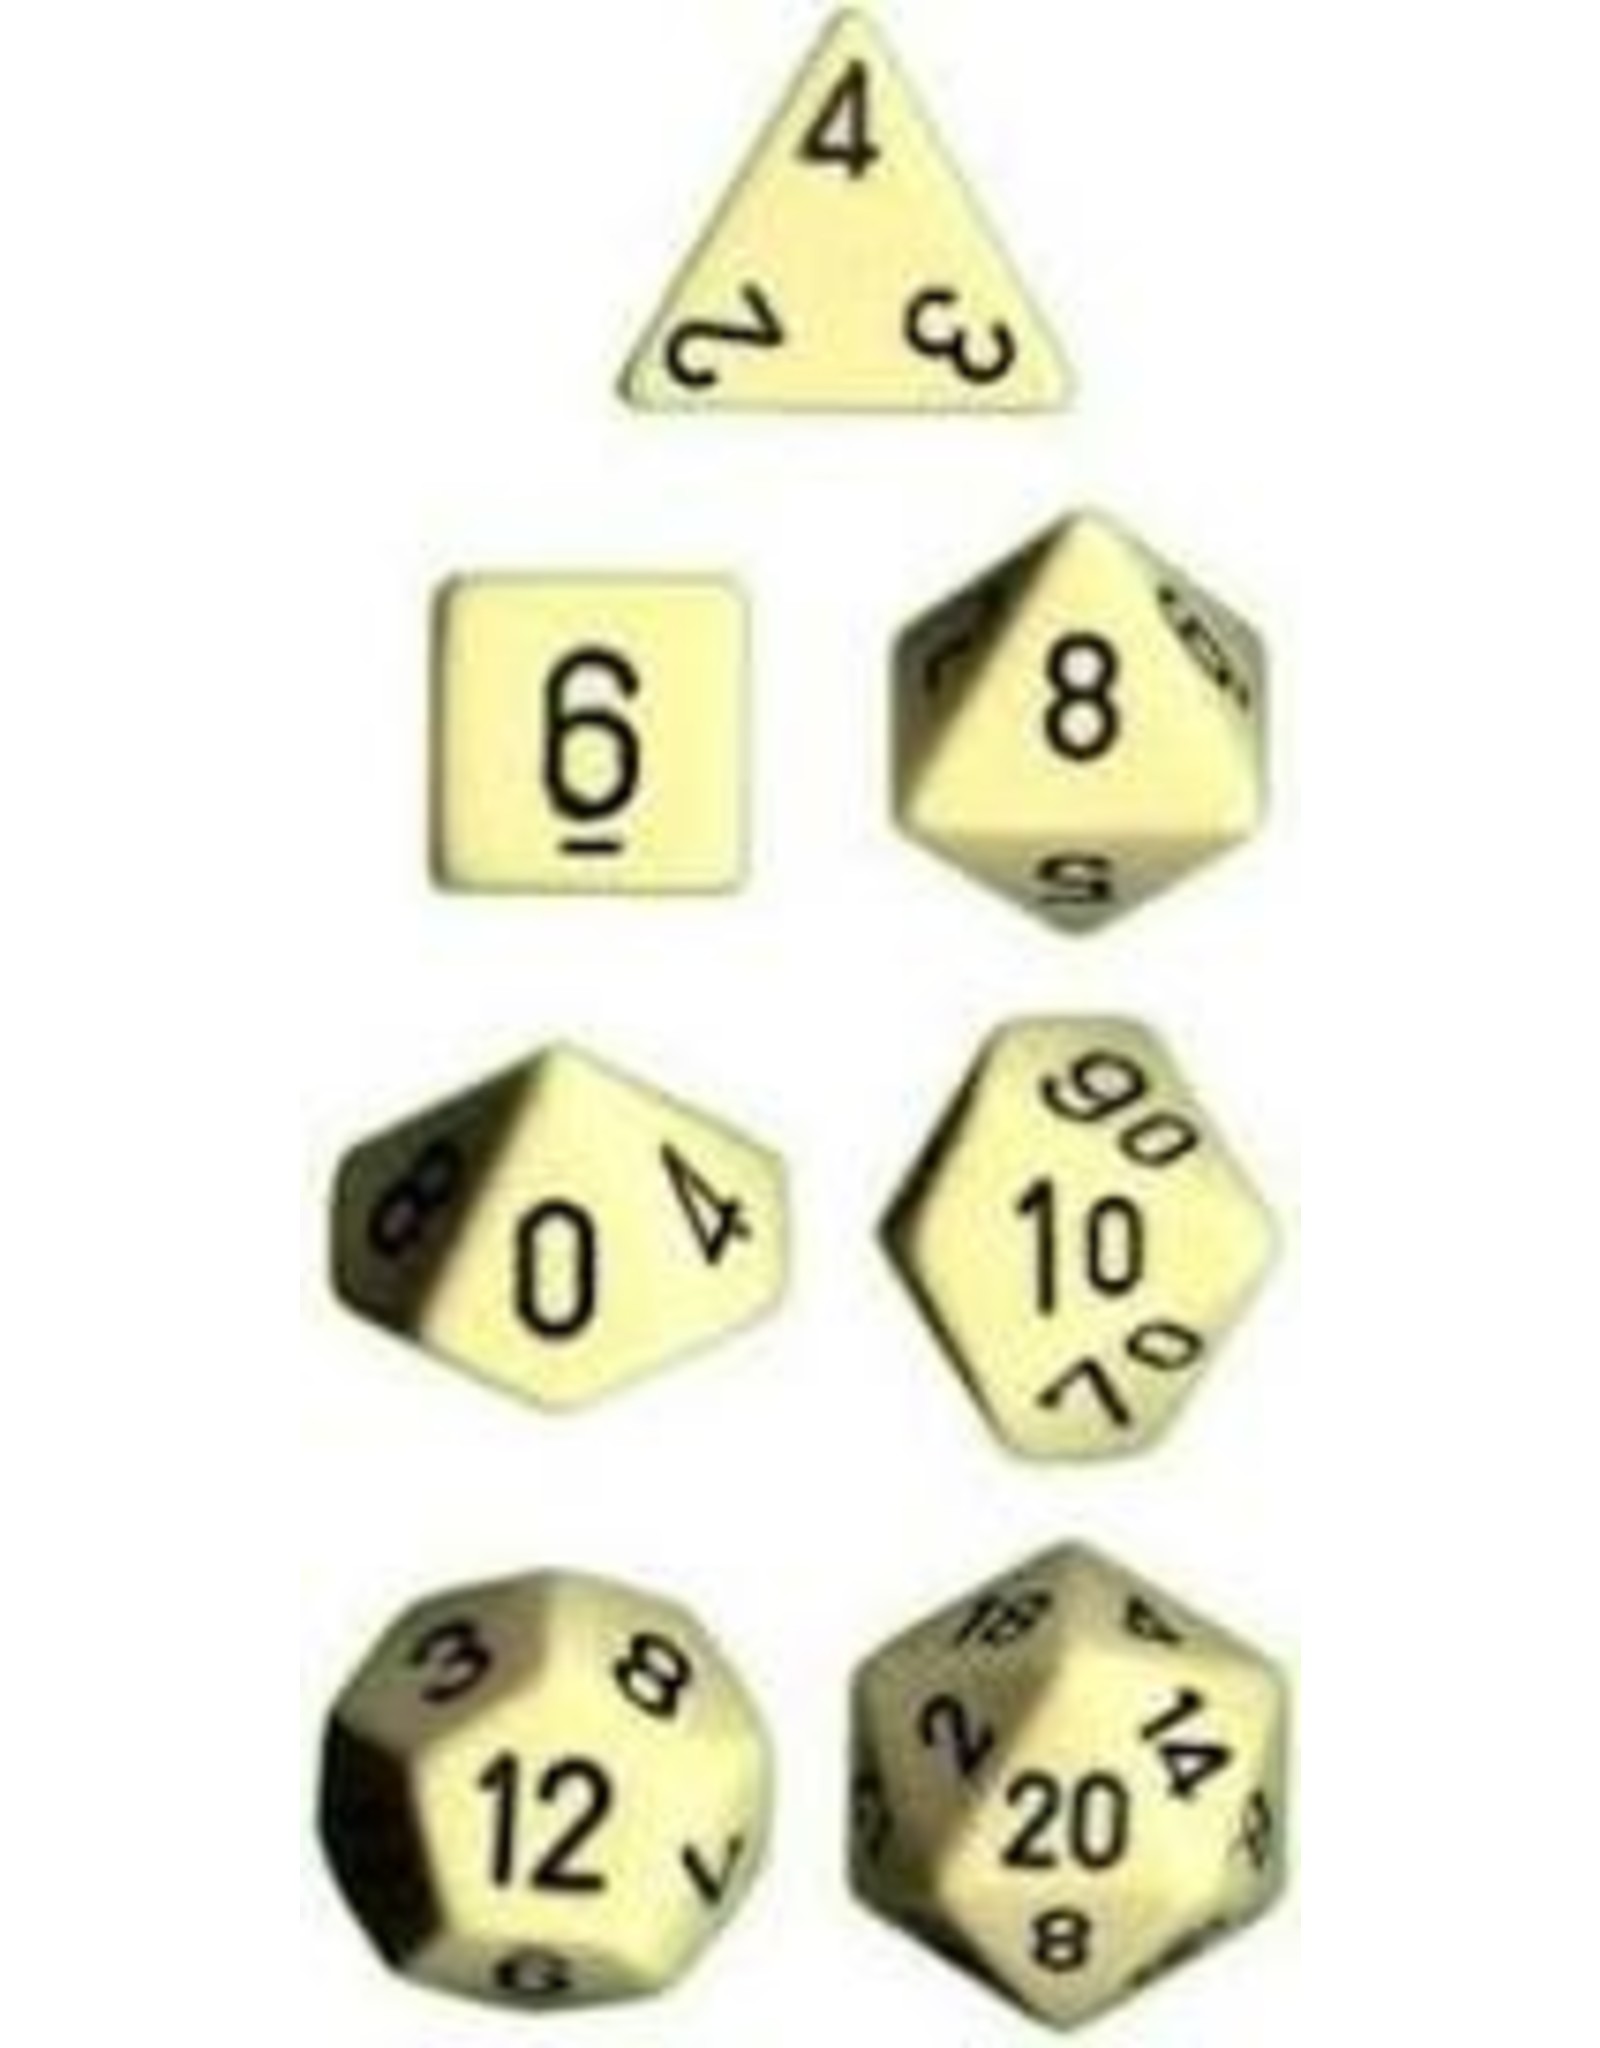 Chessex 7-Set Polyhedral Cube Opaque Ivory/Black